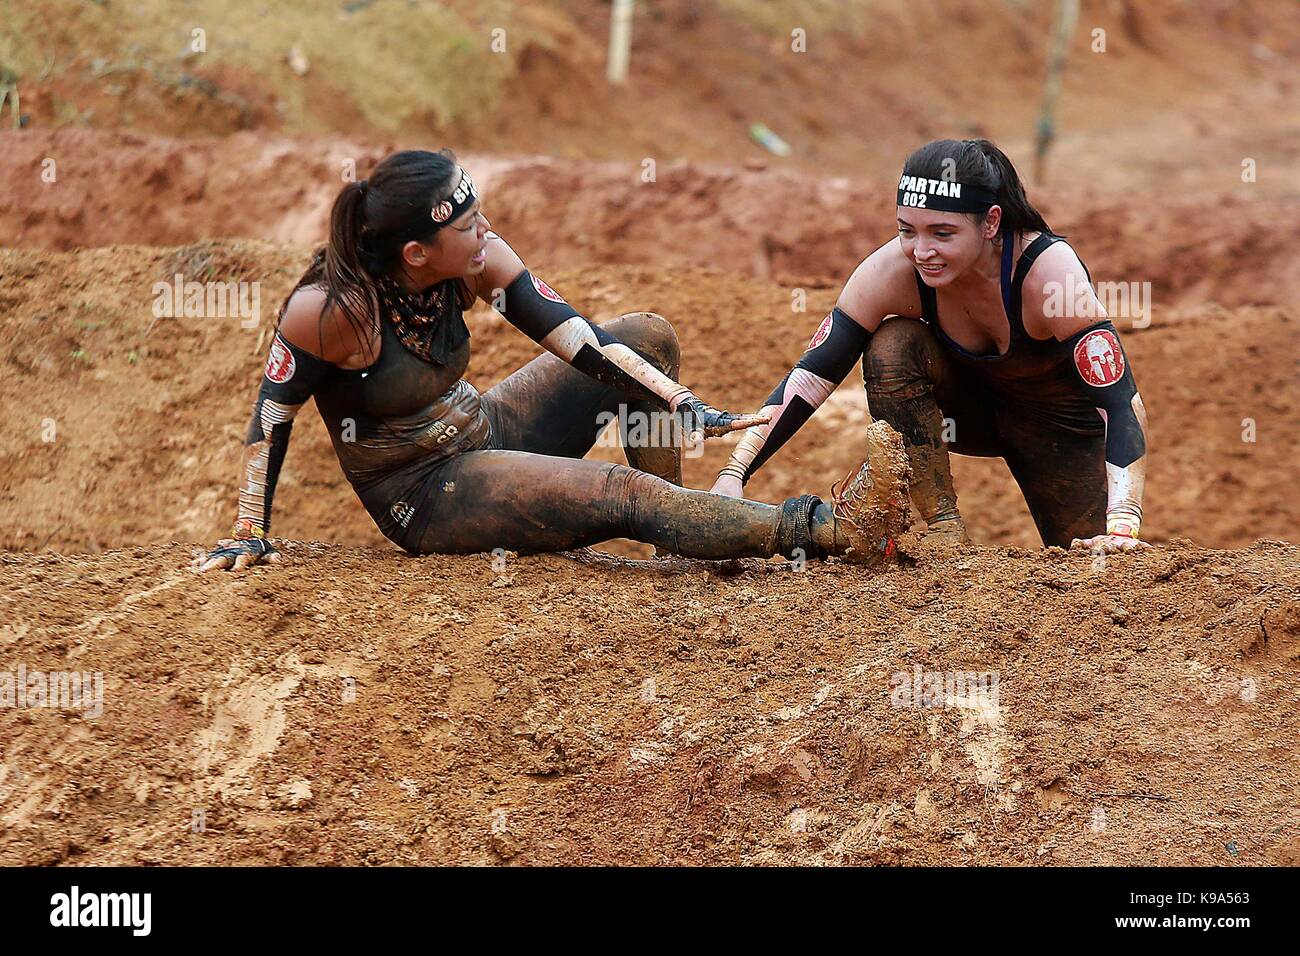 Rizal Province, Philippines. 23rd Sep, 2017. Two female participants compete during the Spartan Race 2017 in Rizal Province, the Philippines, Sept. 23, 2017. Credit: Rouelle Umali/Xinhua/Alamy Live News Stock Photo